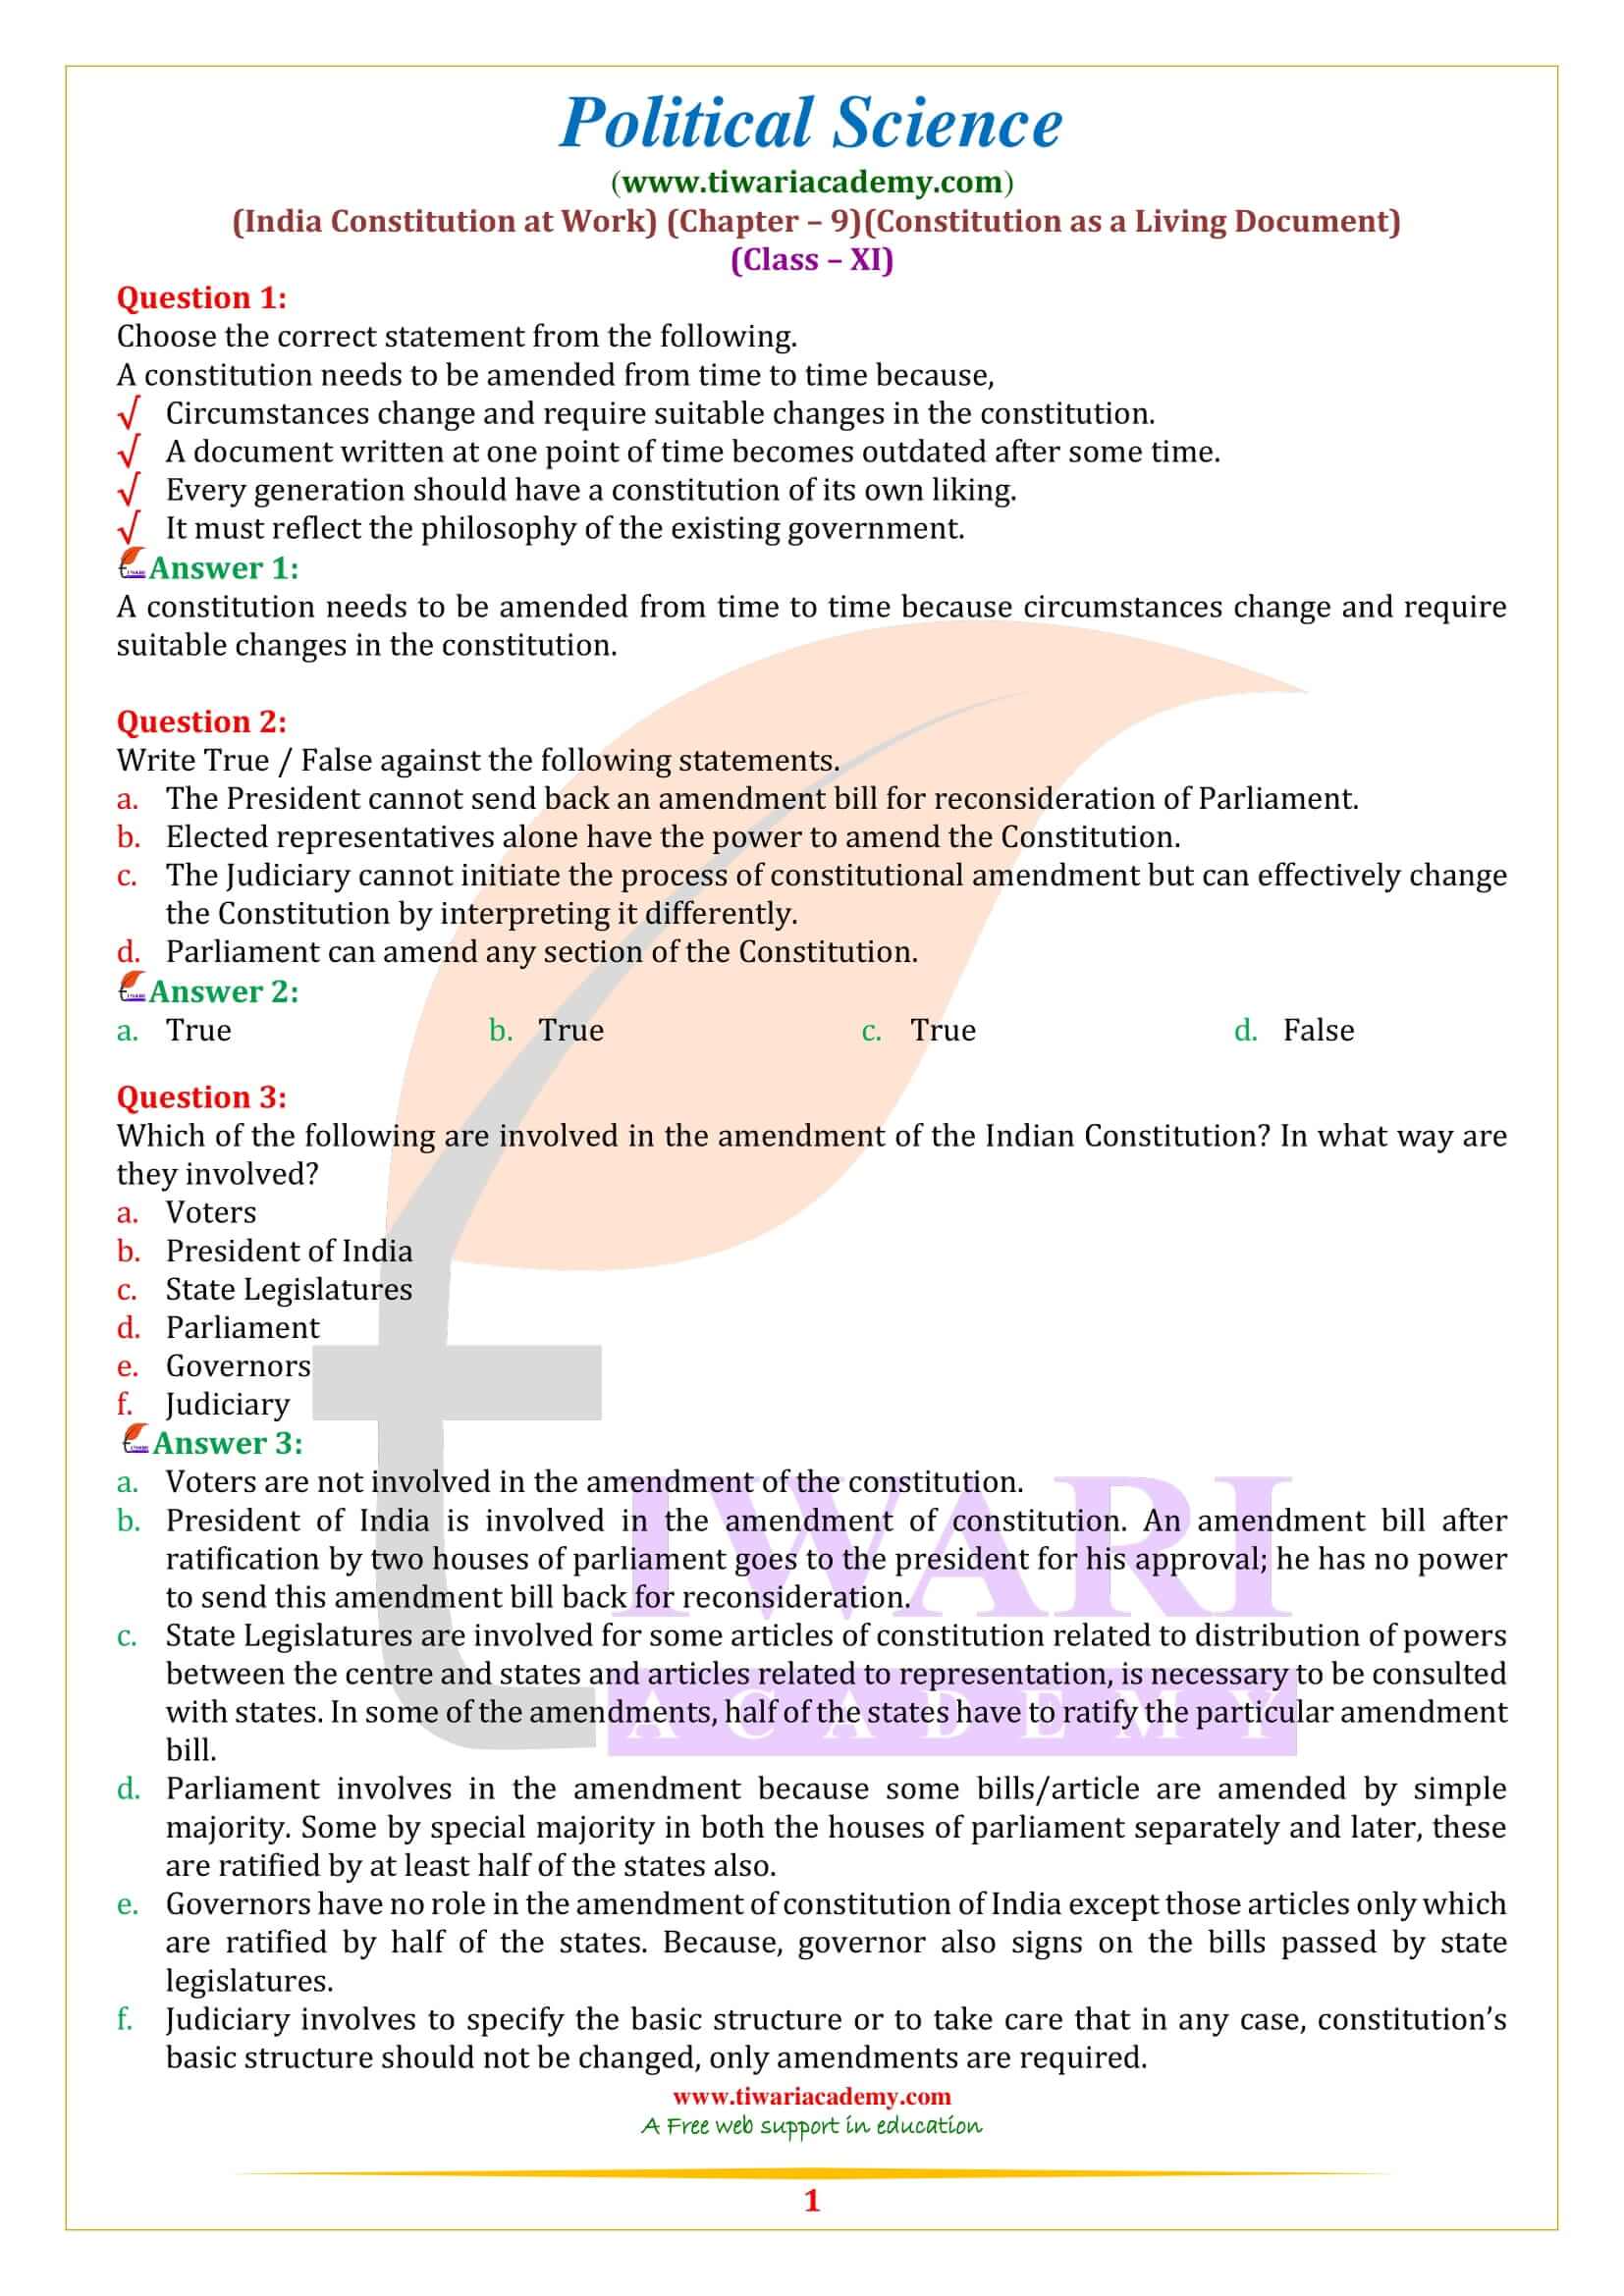 Class 11 Political Science Chapter 9 Constitution as a Living Document